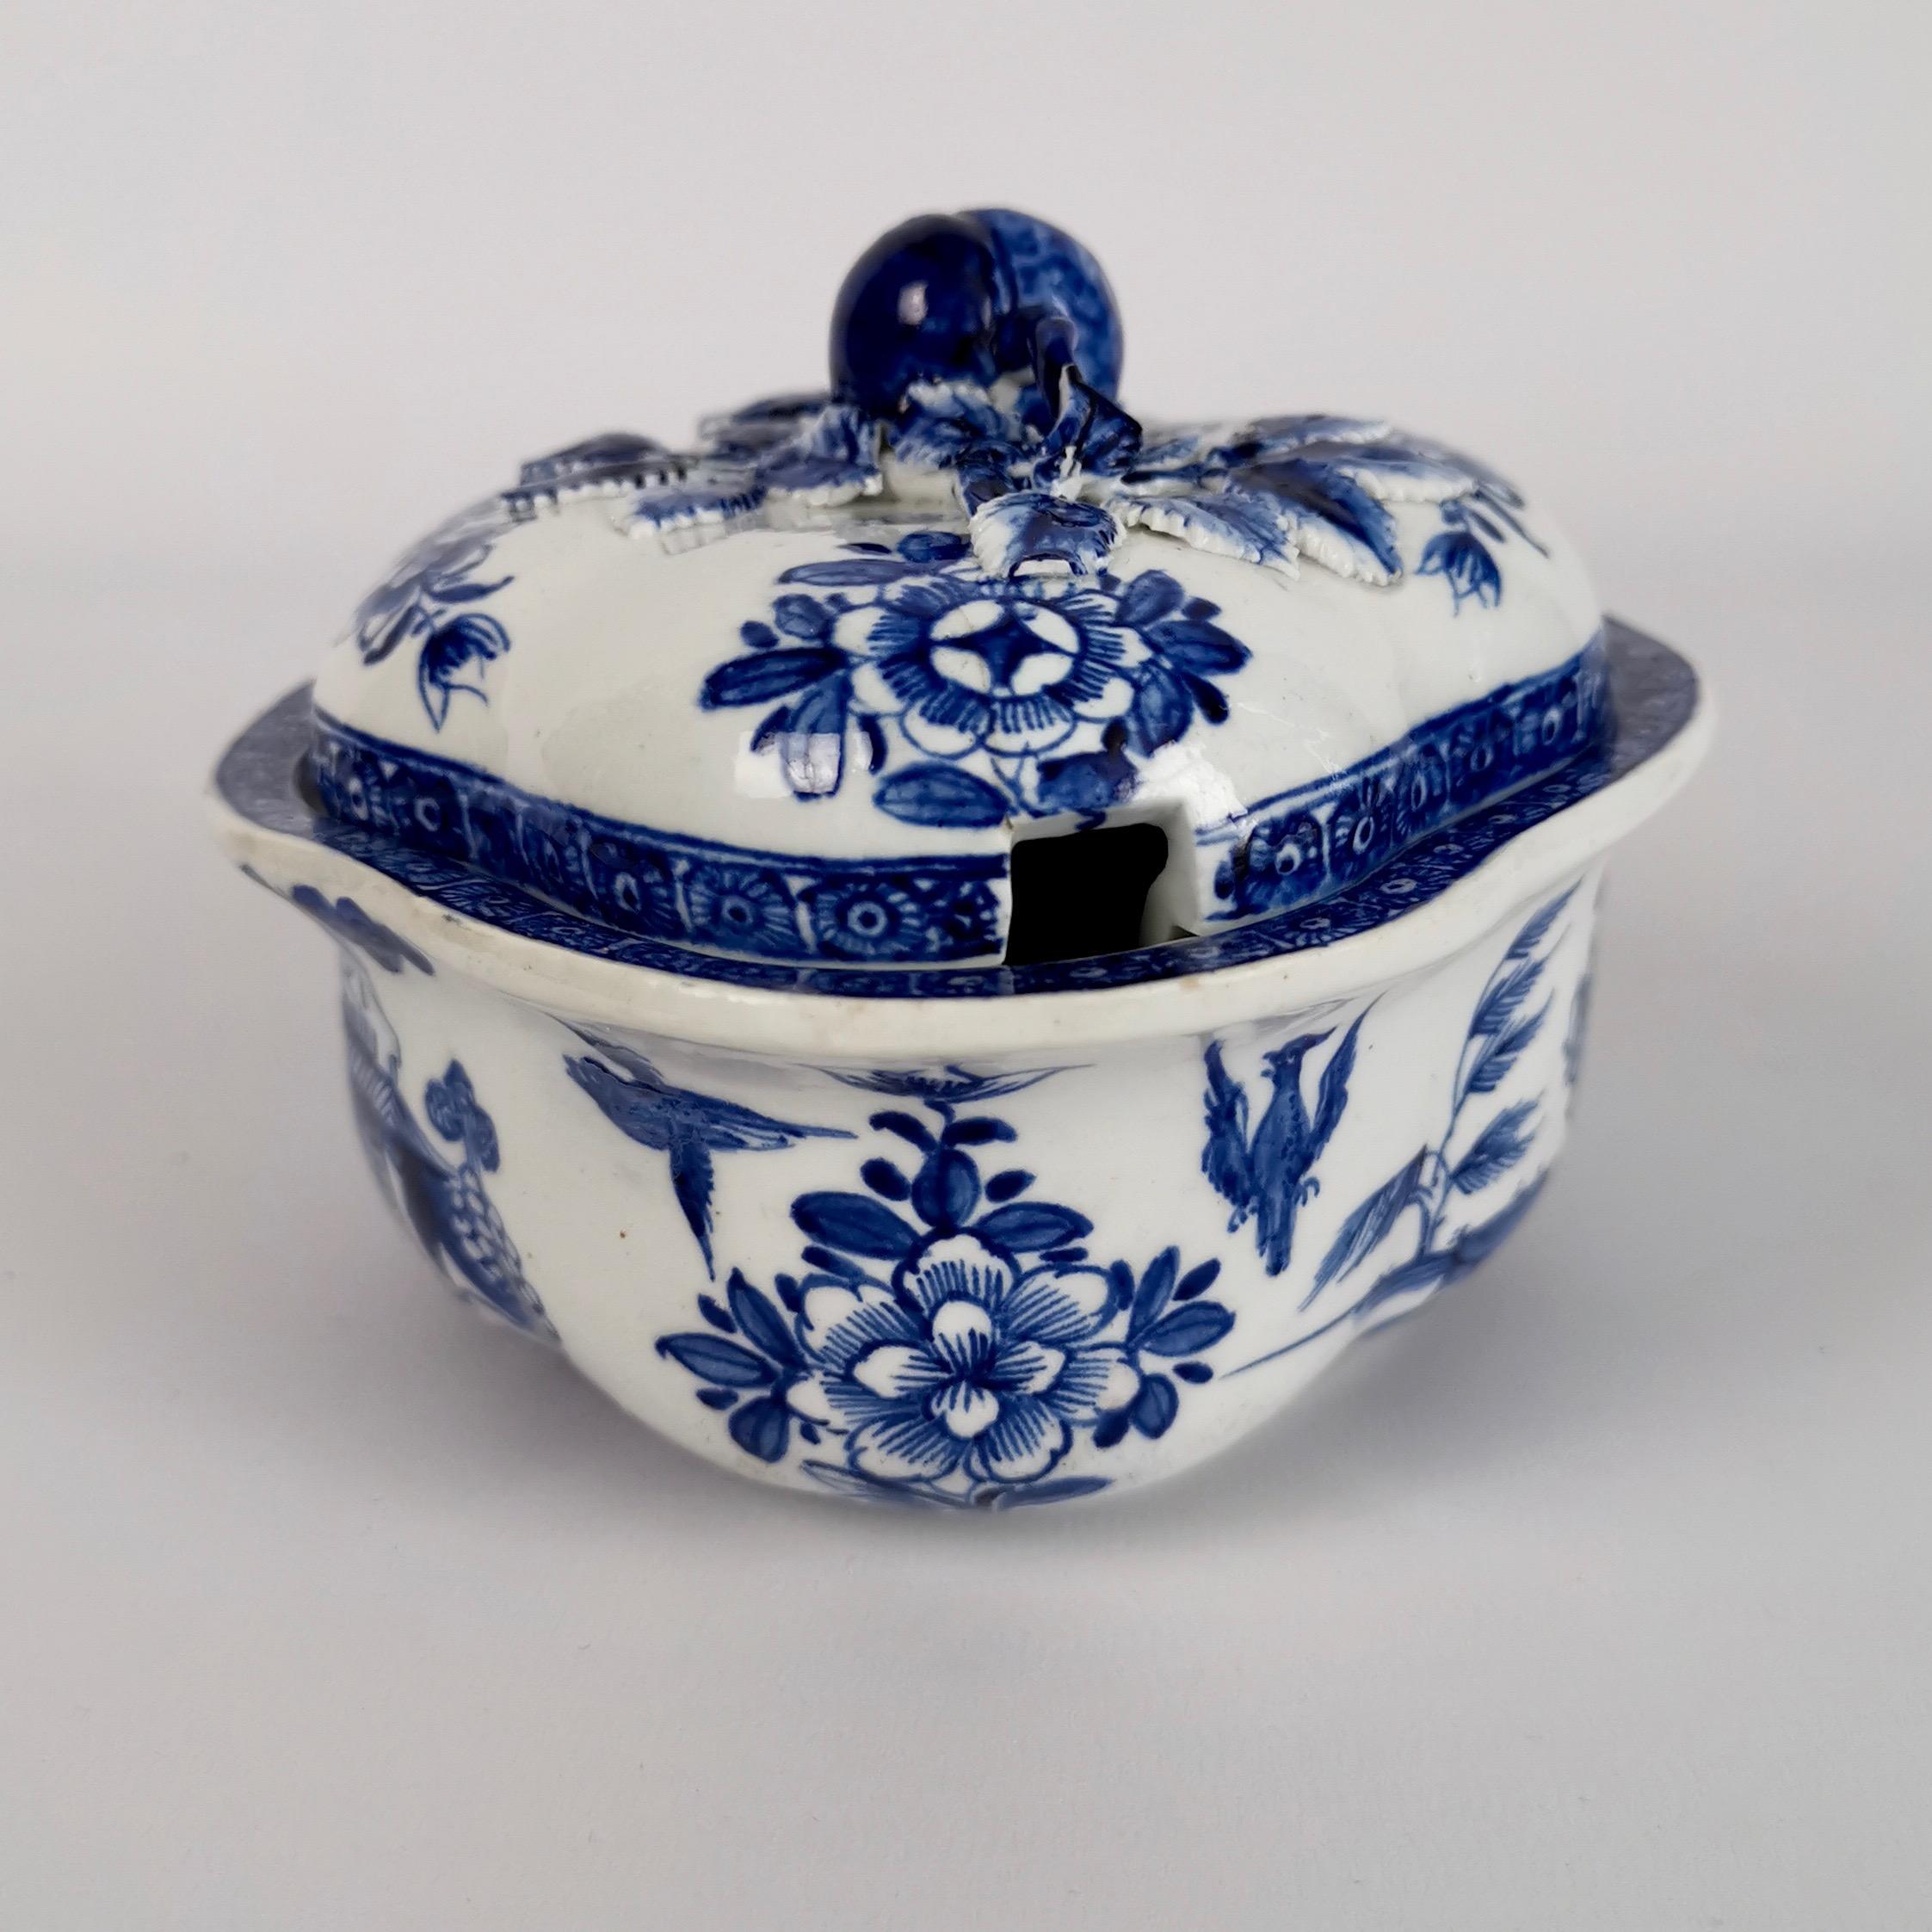 English Derby Porcelain Cream Pot with Cover, Blue and White, ca 1765